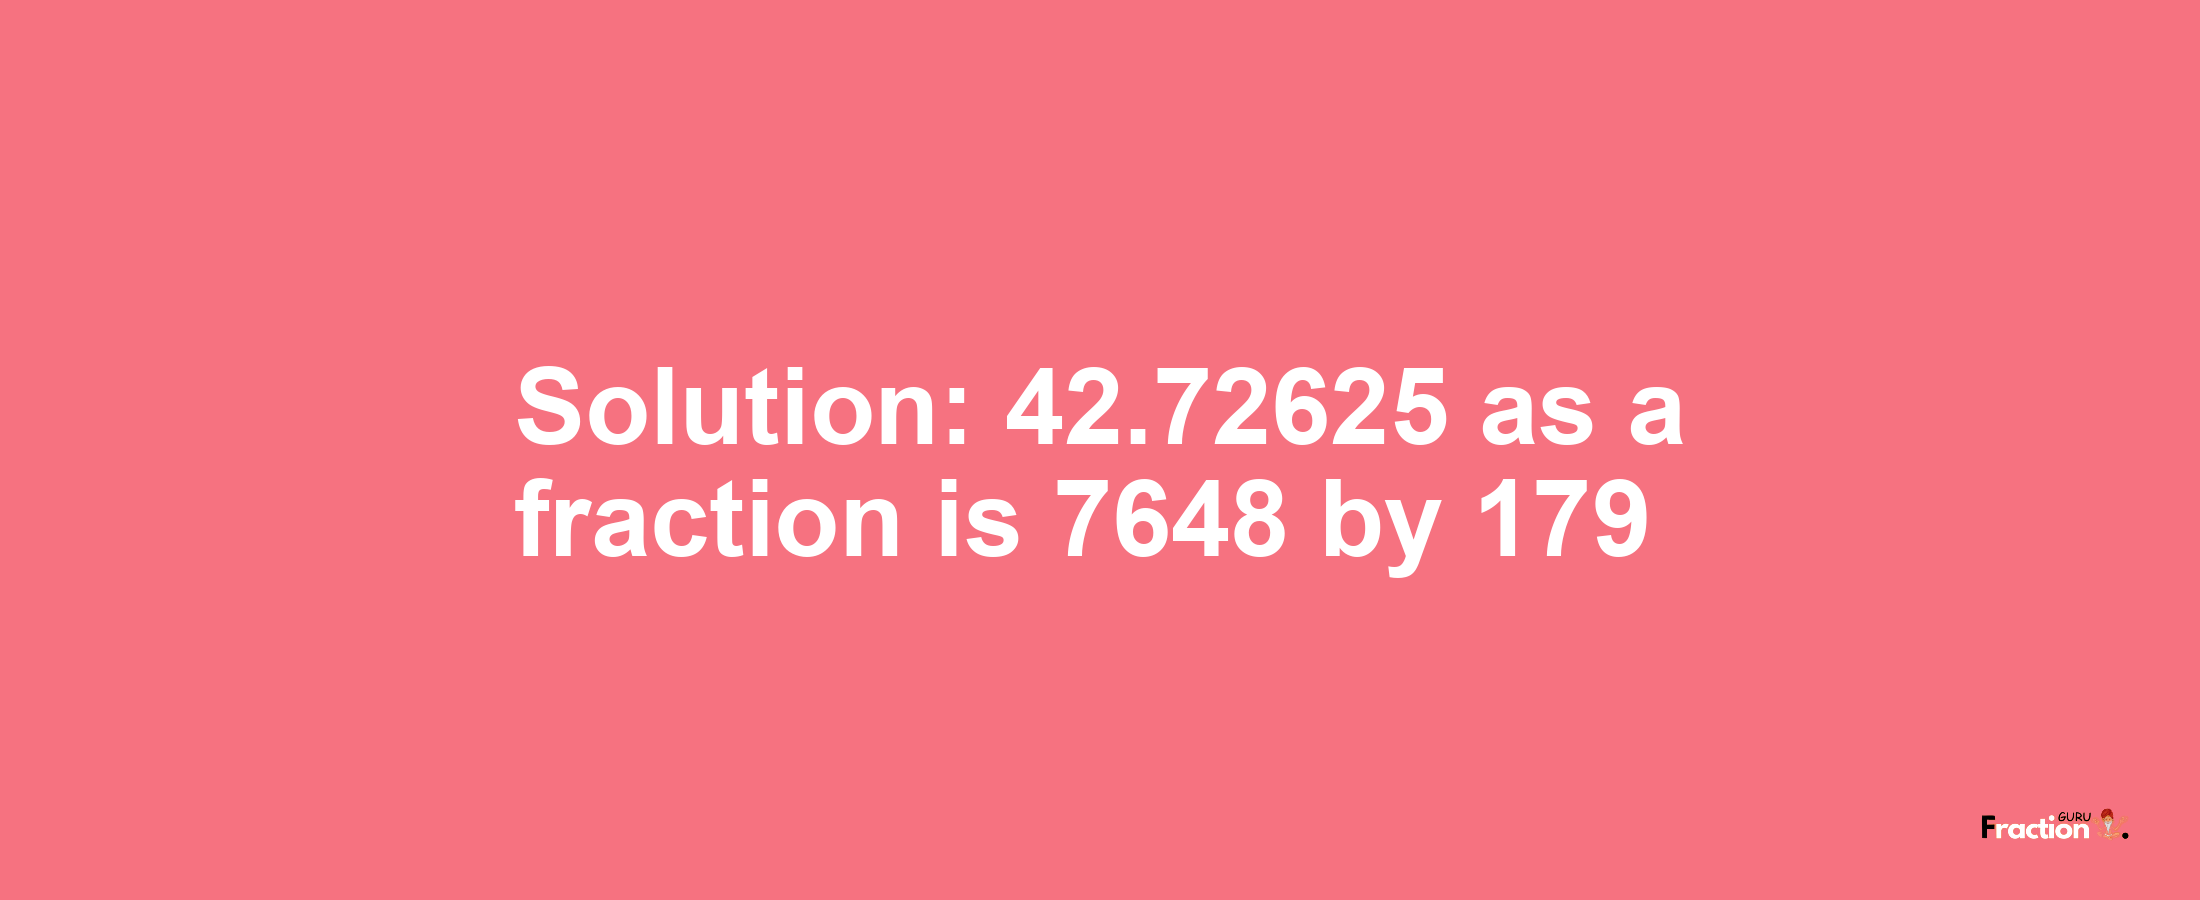 Solution:42.72625 as a fraction is 7648/179